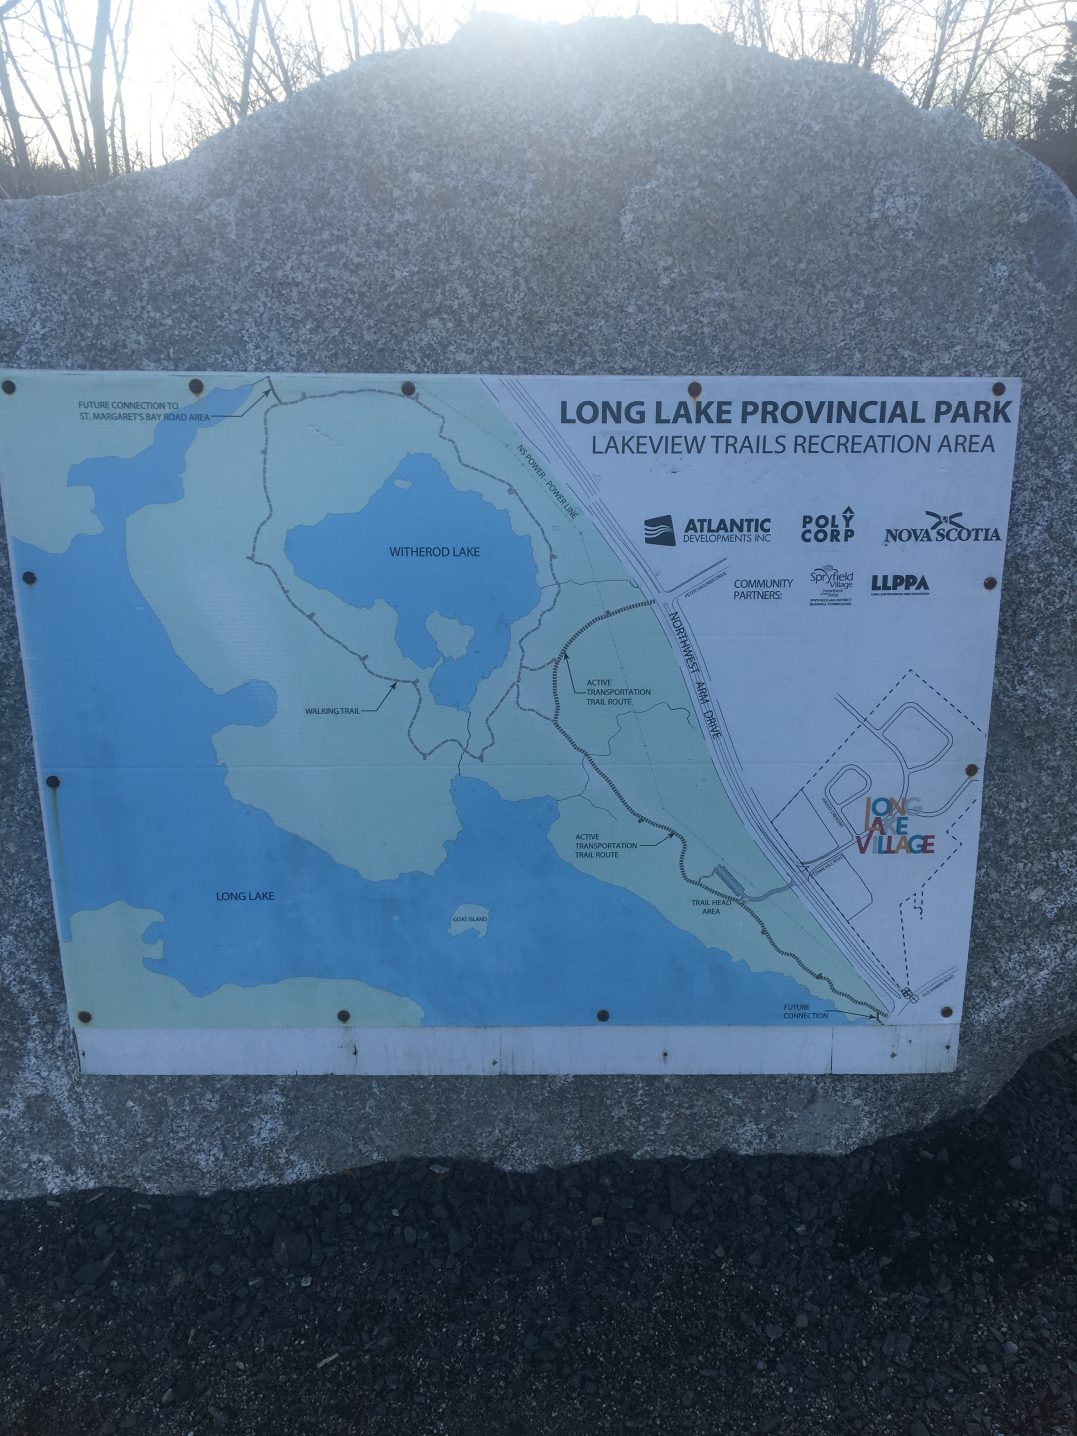 What to on a weekend in halifax _Long Lake Provincial Park